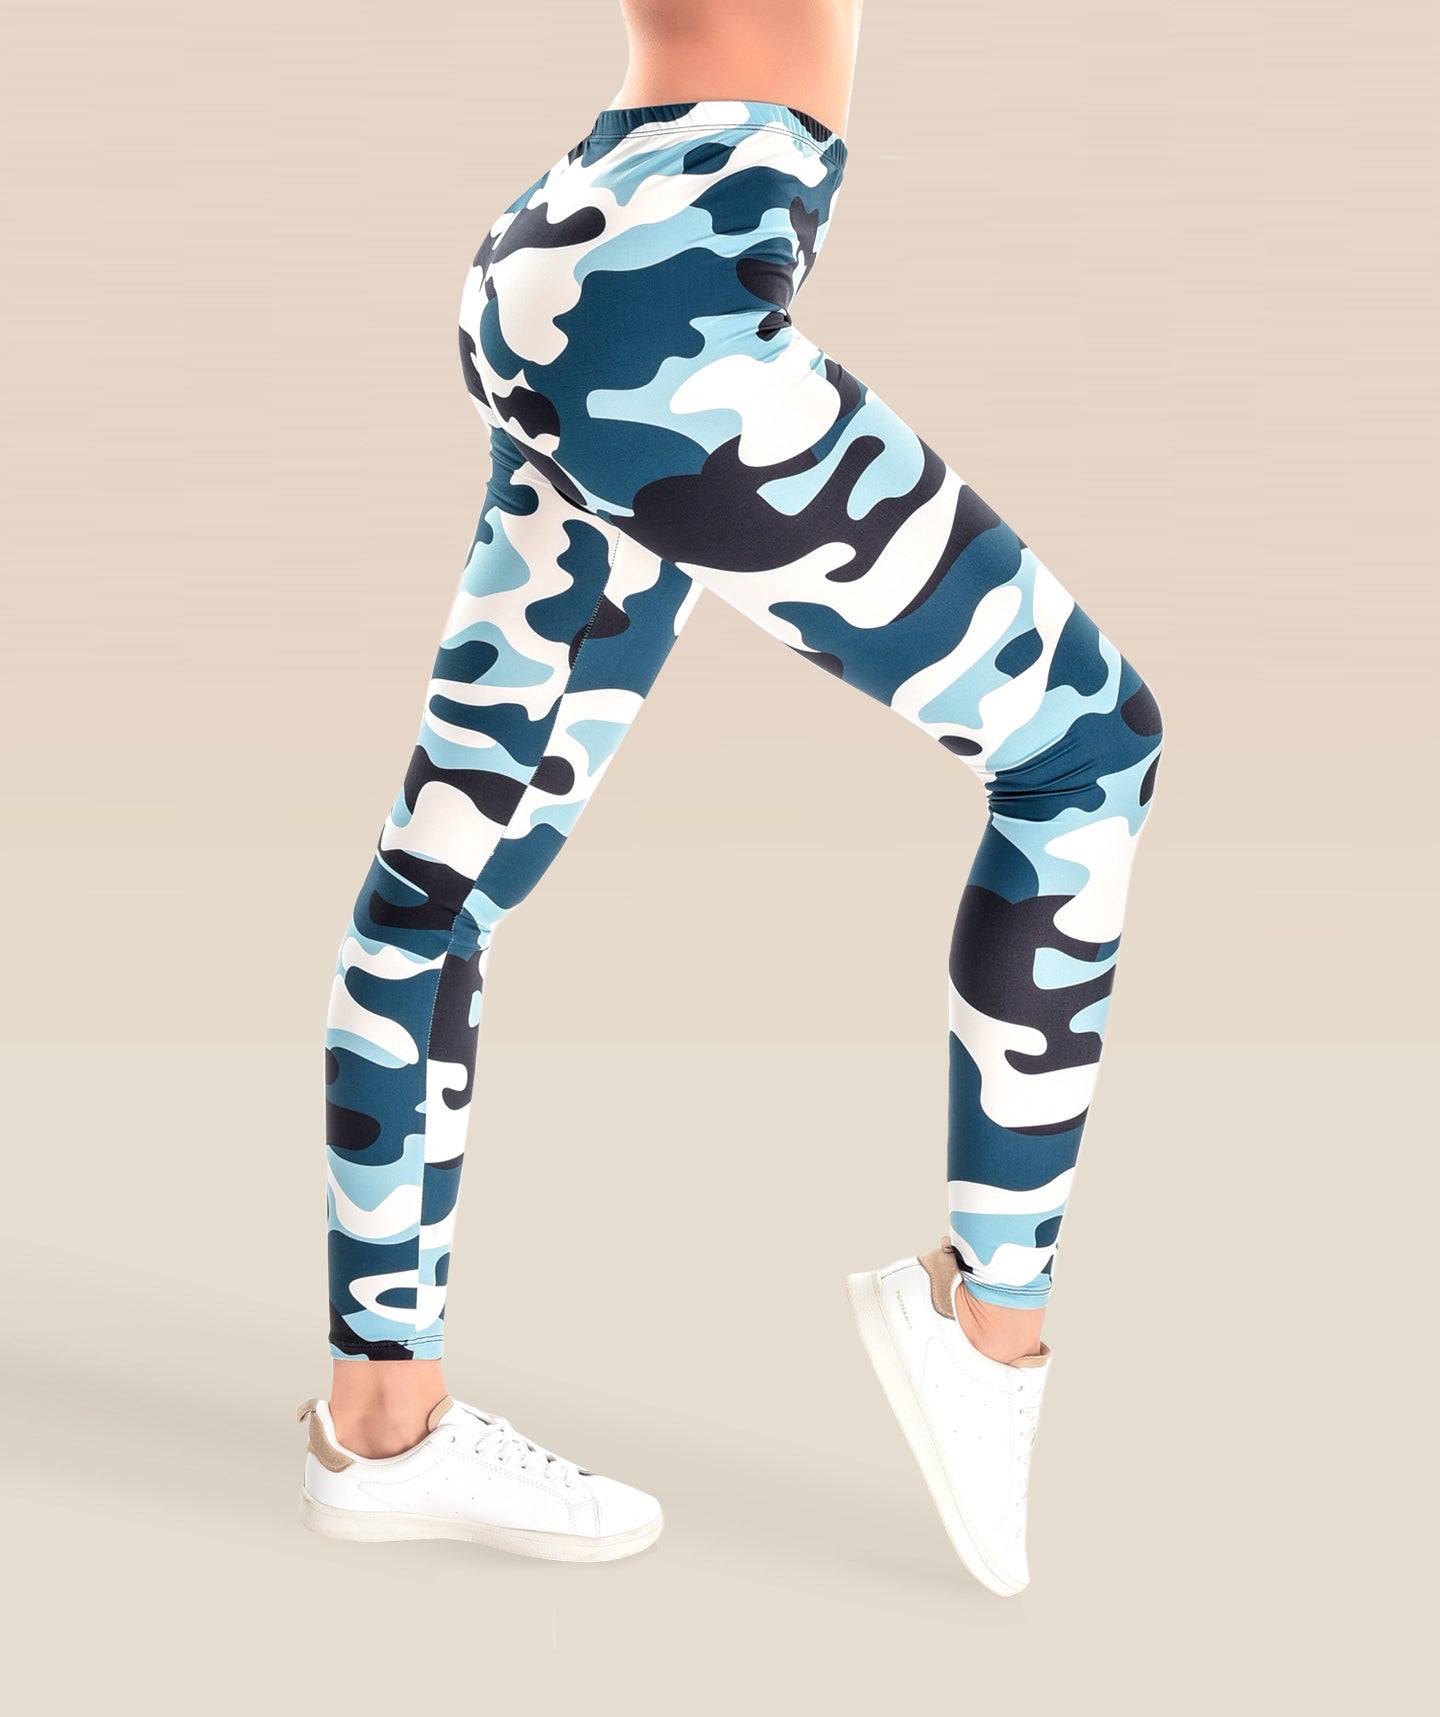 Camo Print in – Camouflage Blue Leggings Navy